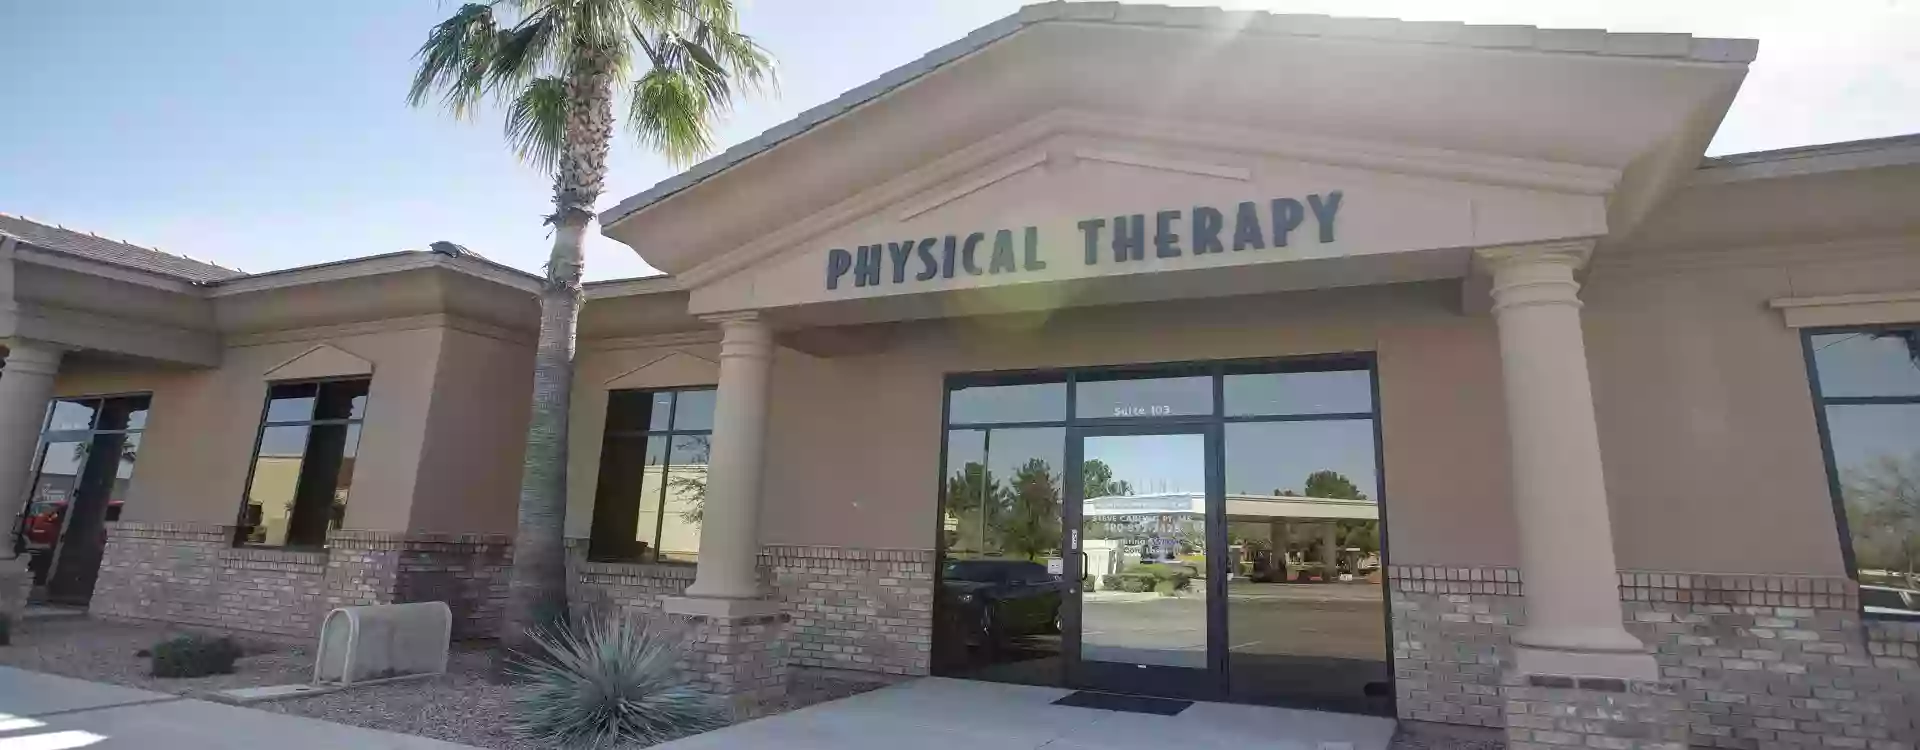 Carling Aquatic & Physical Therapy